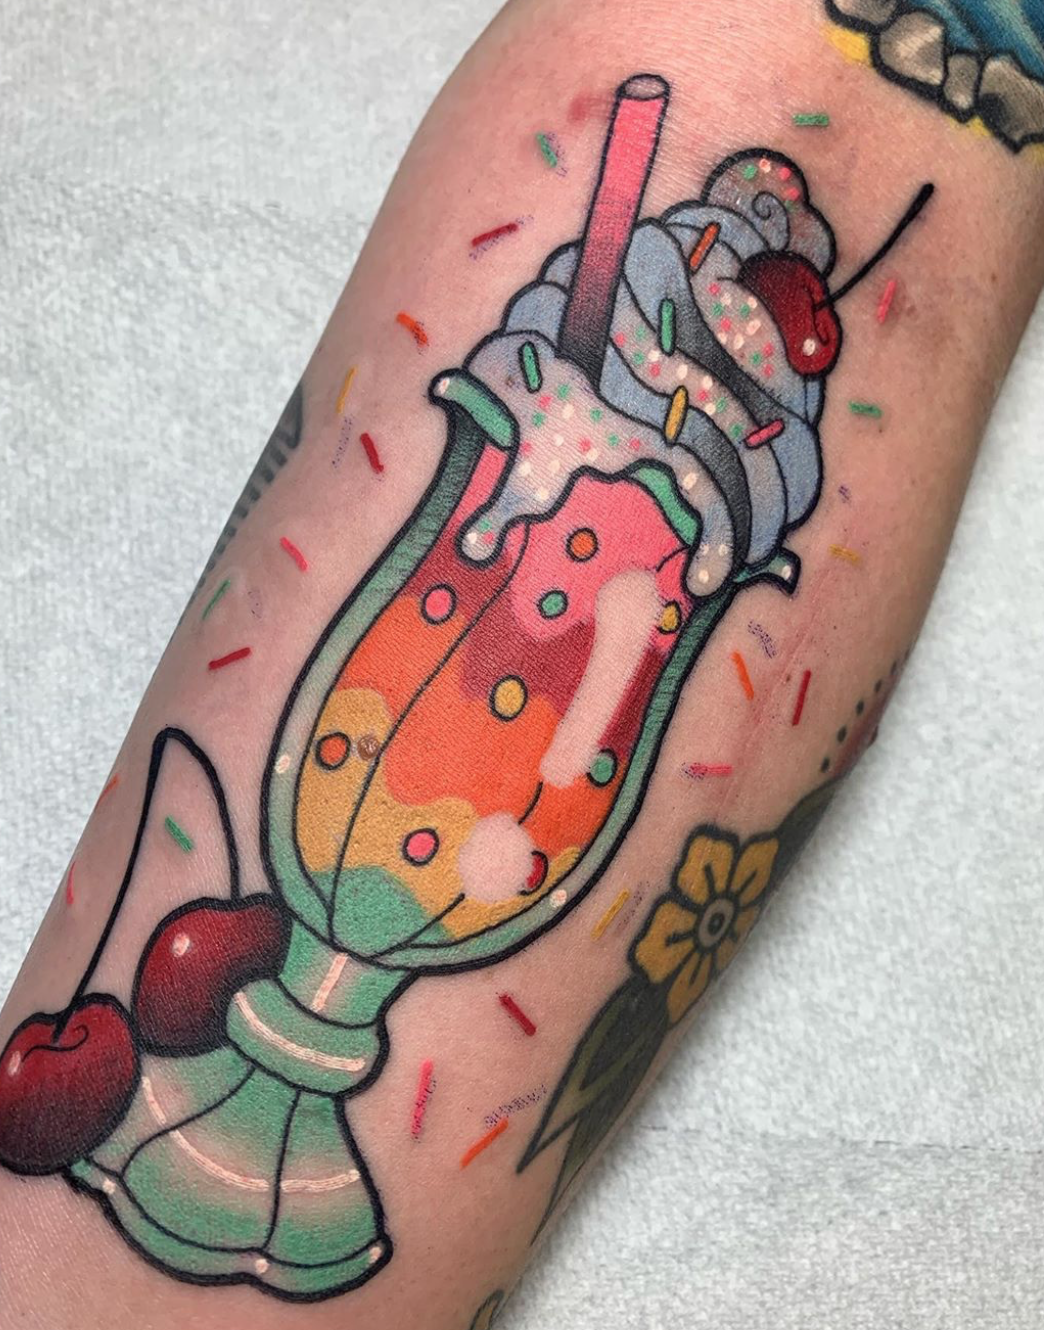 Ice cream tattoo by Carly Zehring